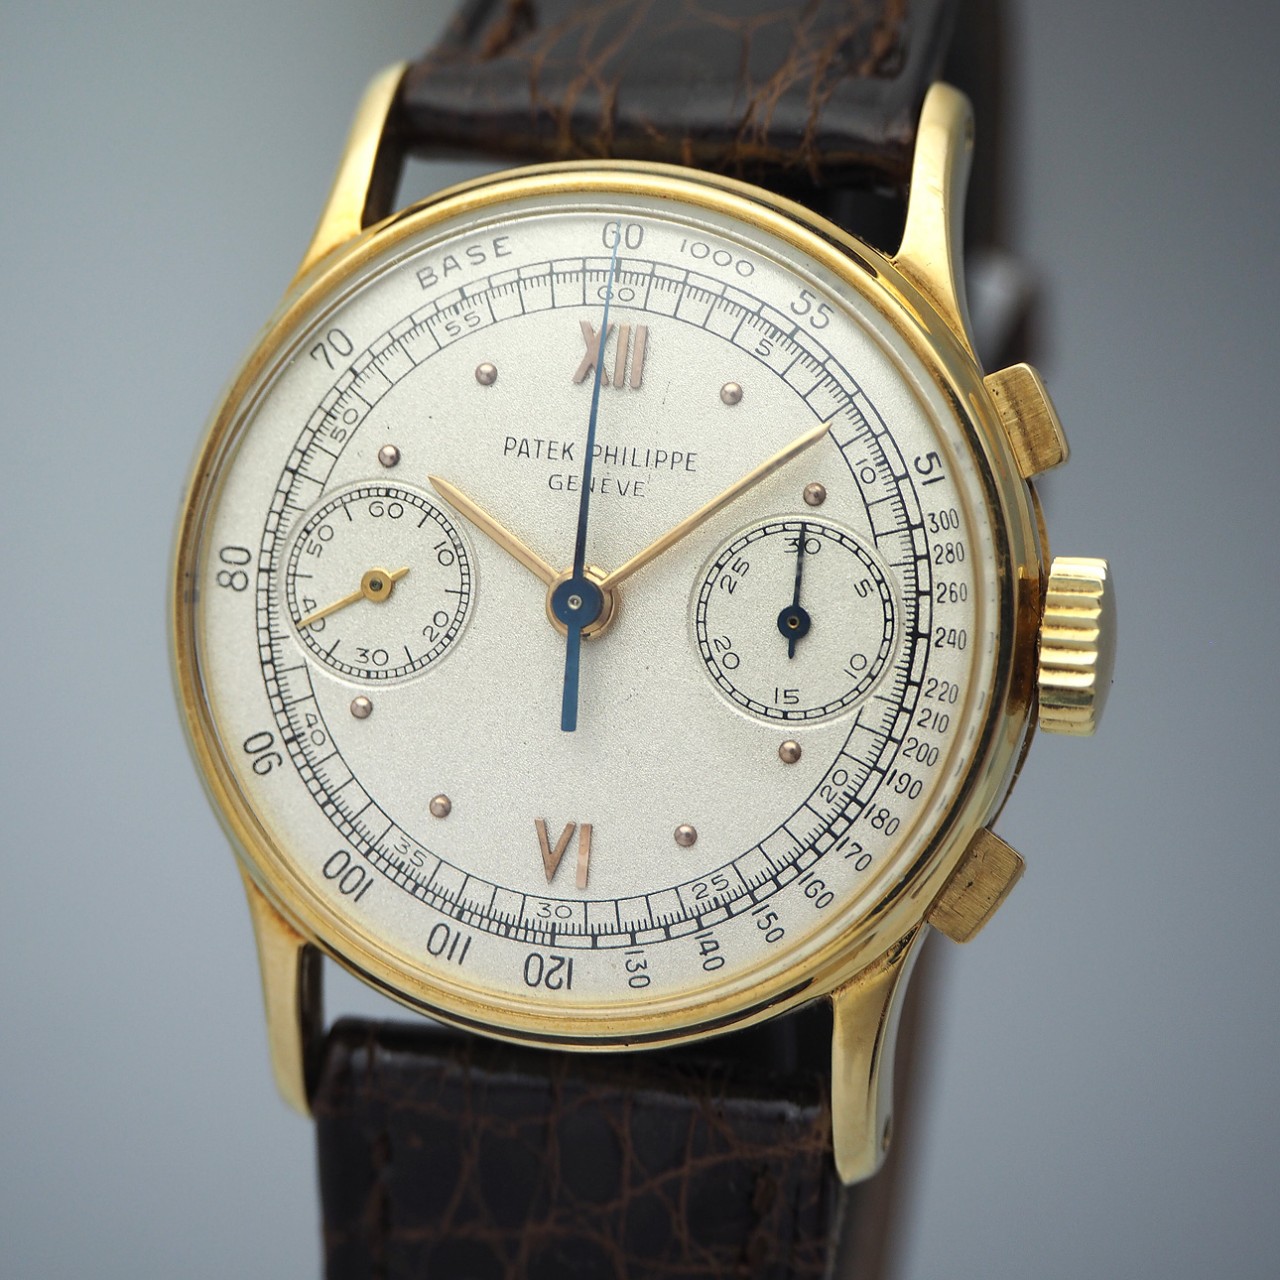 Patek Philippe Chronograph Ref./Cal. 130, Gold 18k/750 from 1950